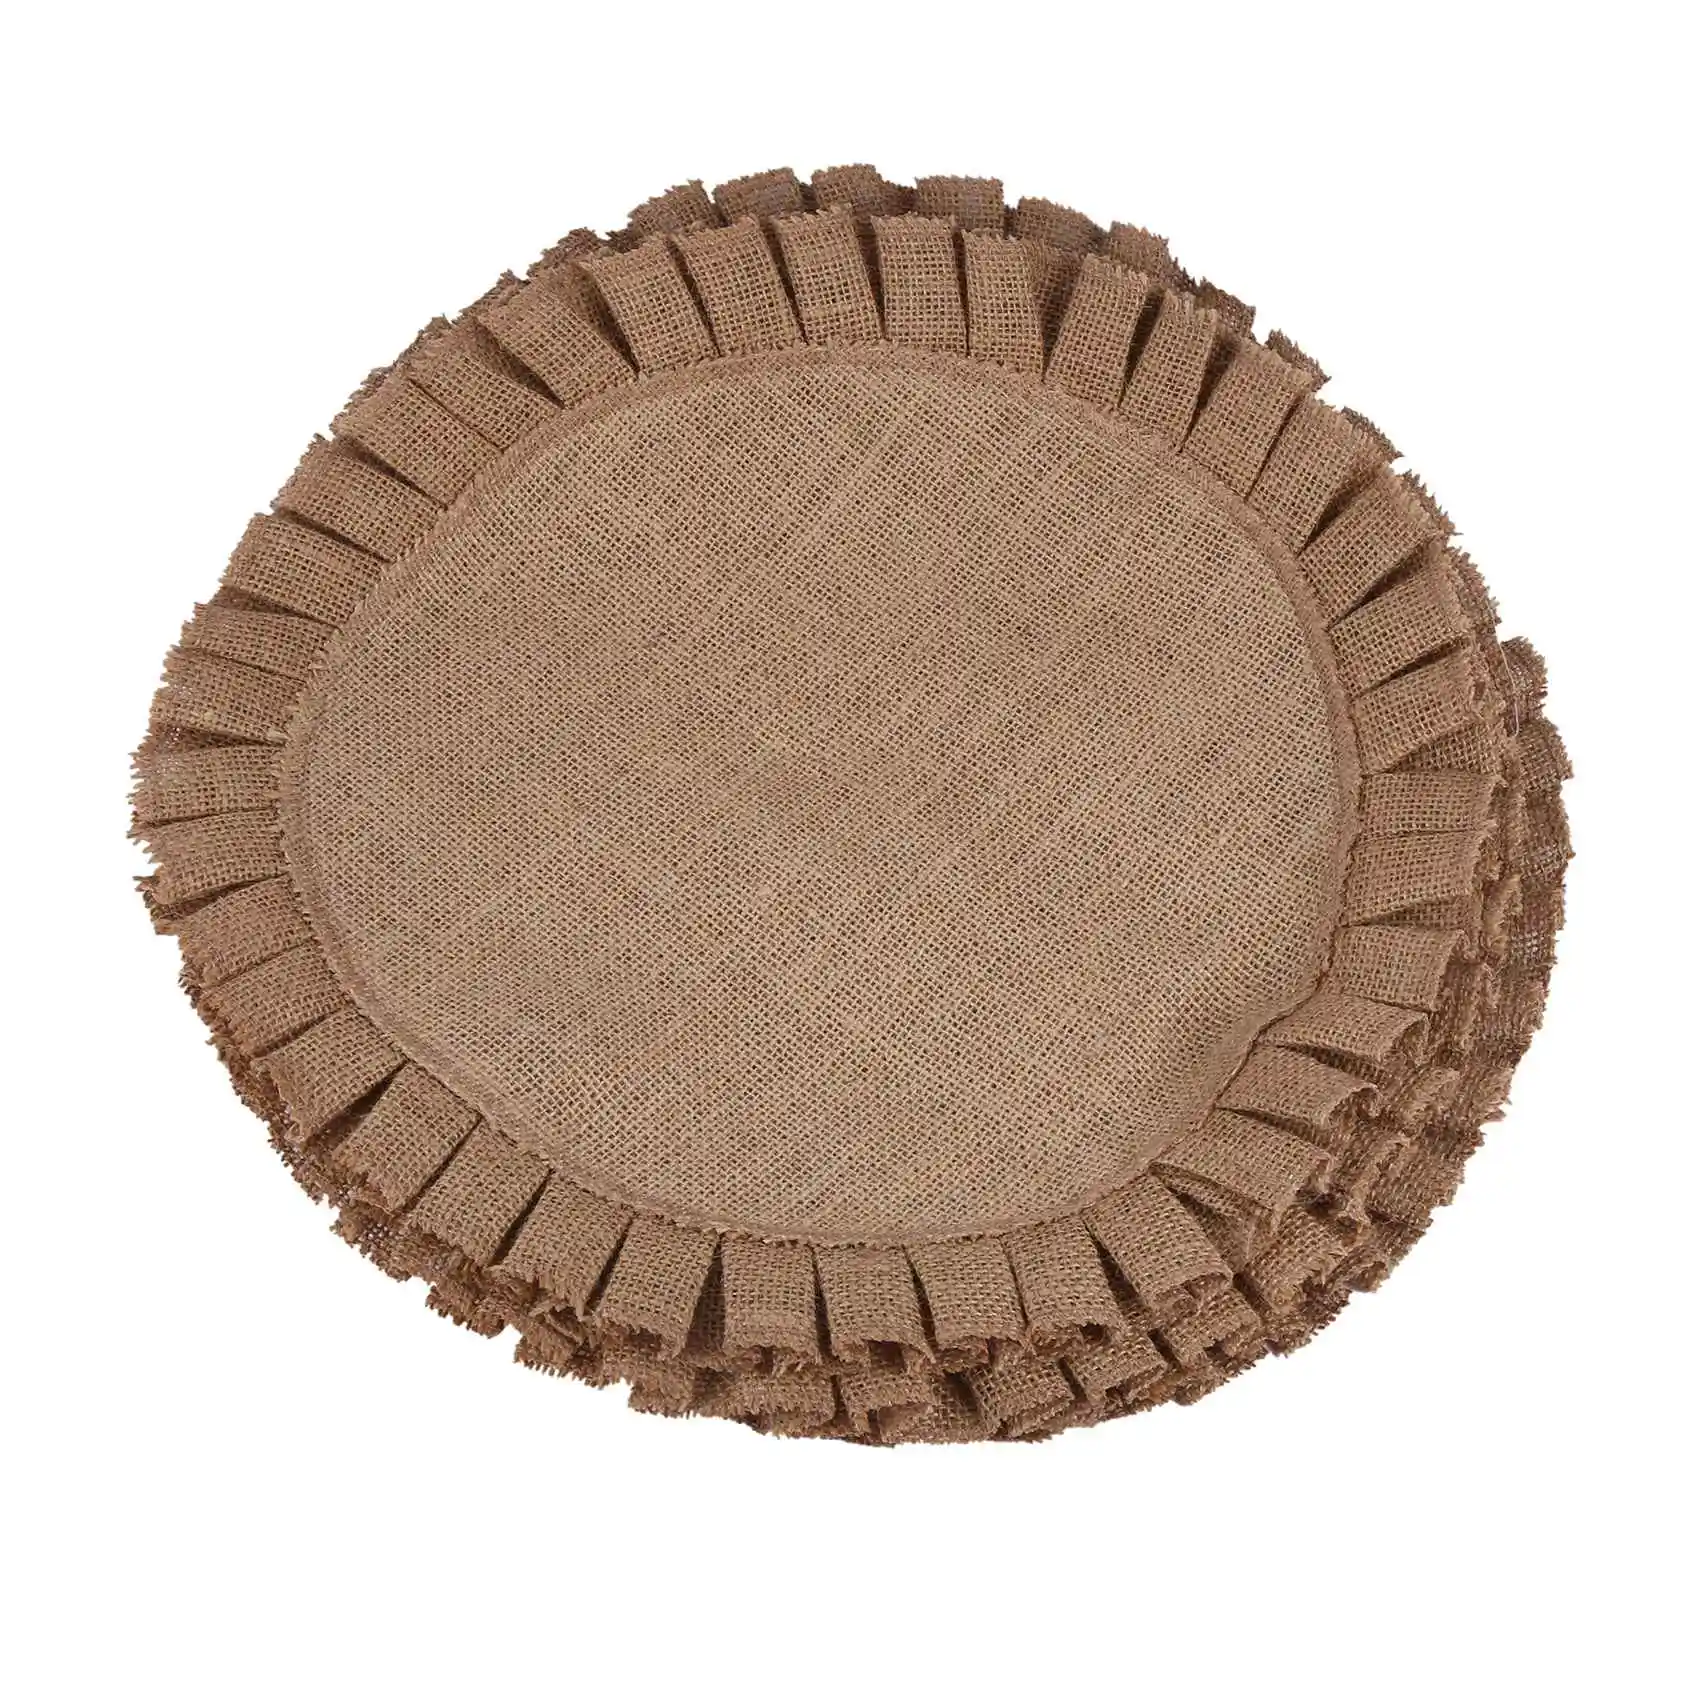 

Rustic Farmhouse Burlap Round Placemats 4, Size in 15 Inches Diameter